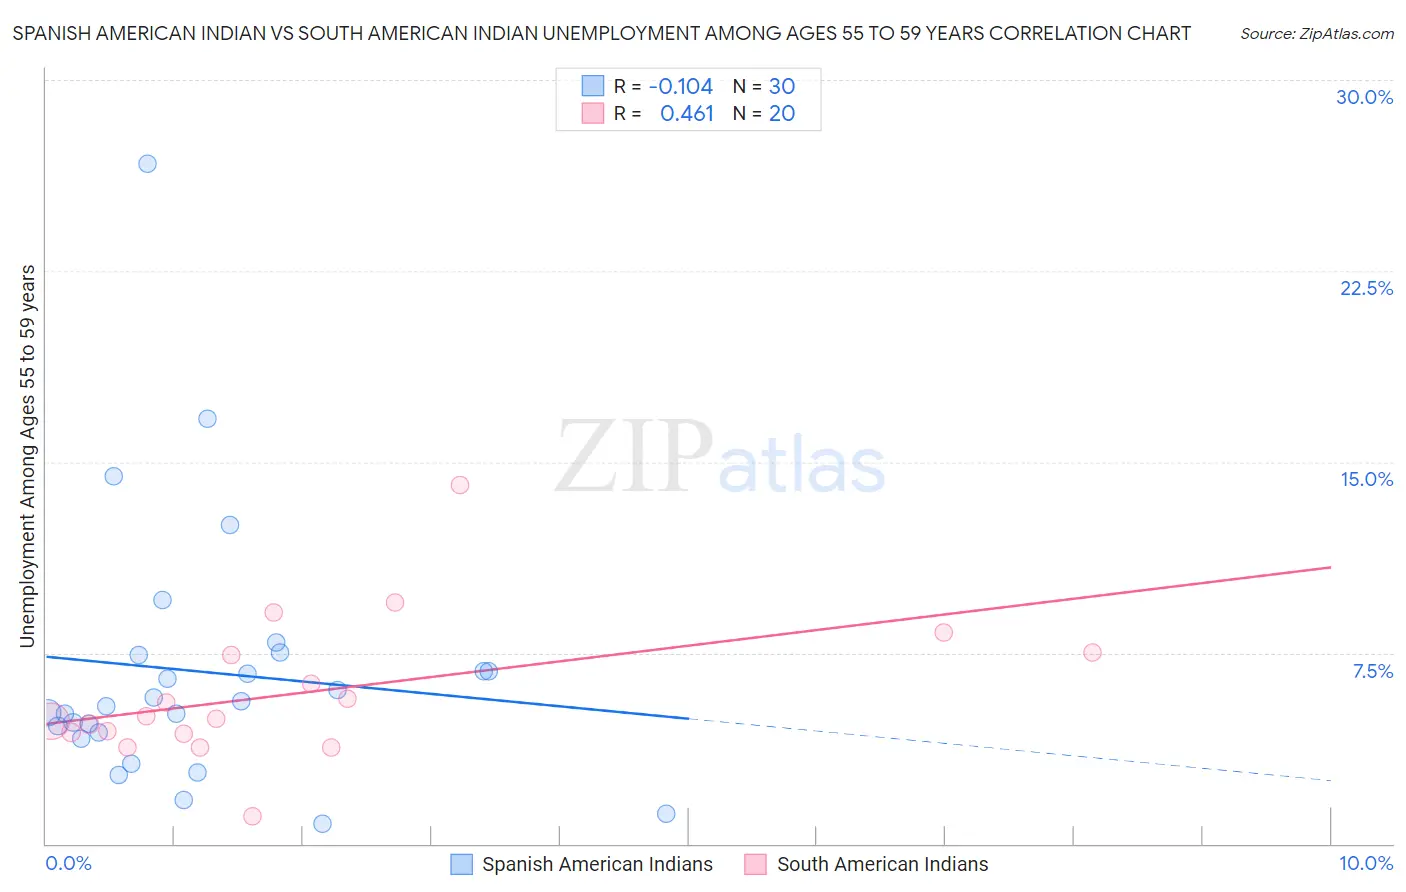 Spanish American Indian vs South American Indian Unemployment Among Ages 55 to 59 years